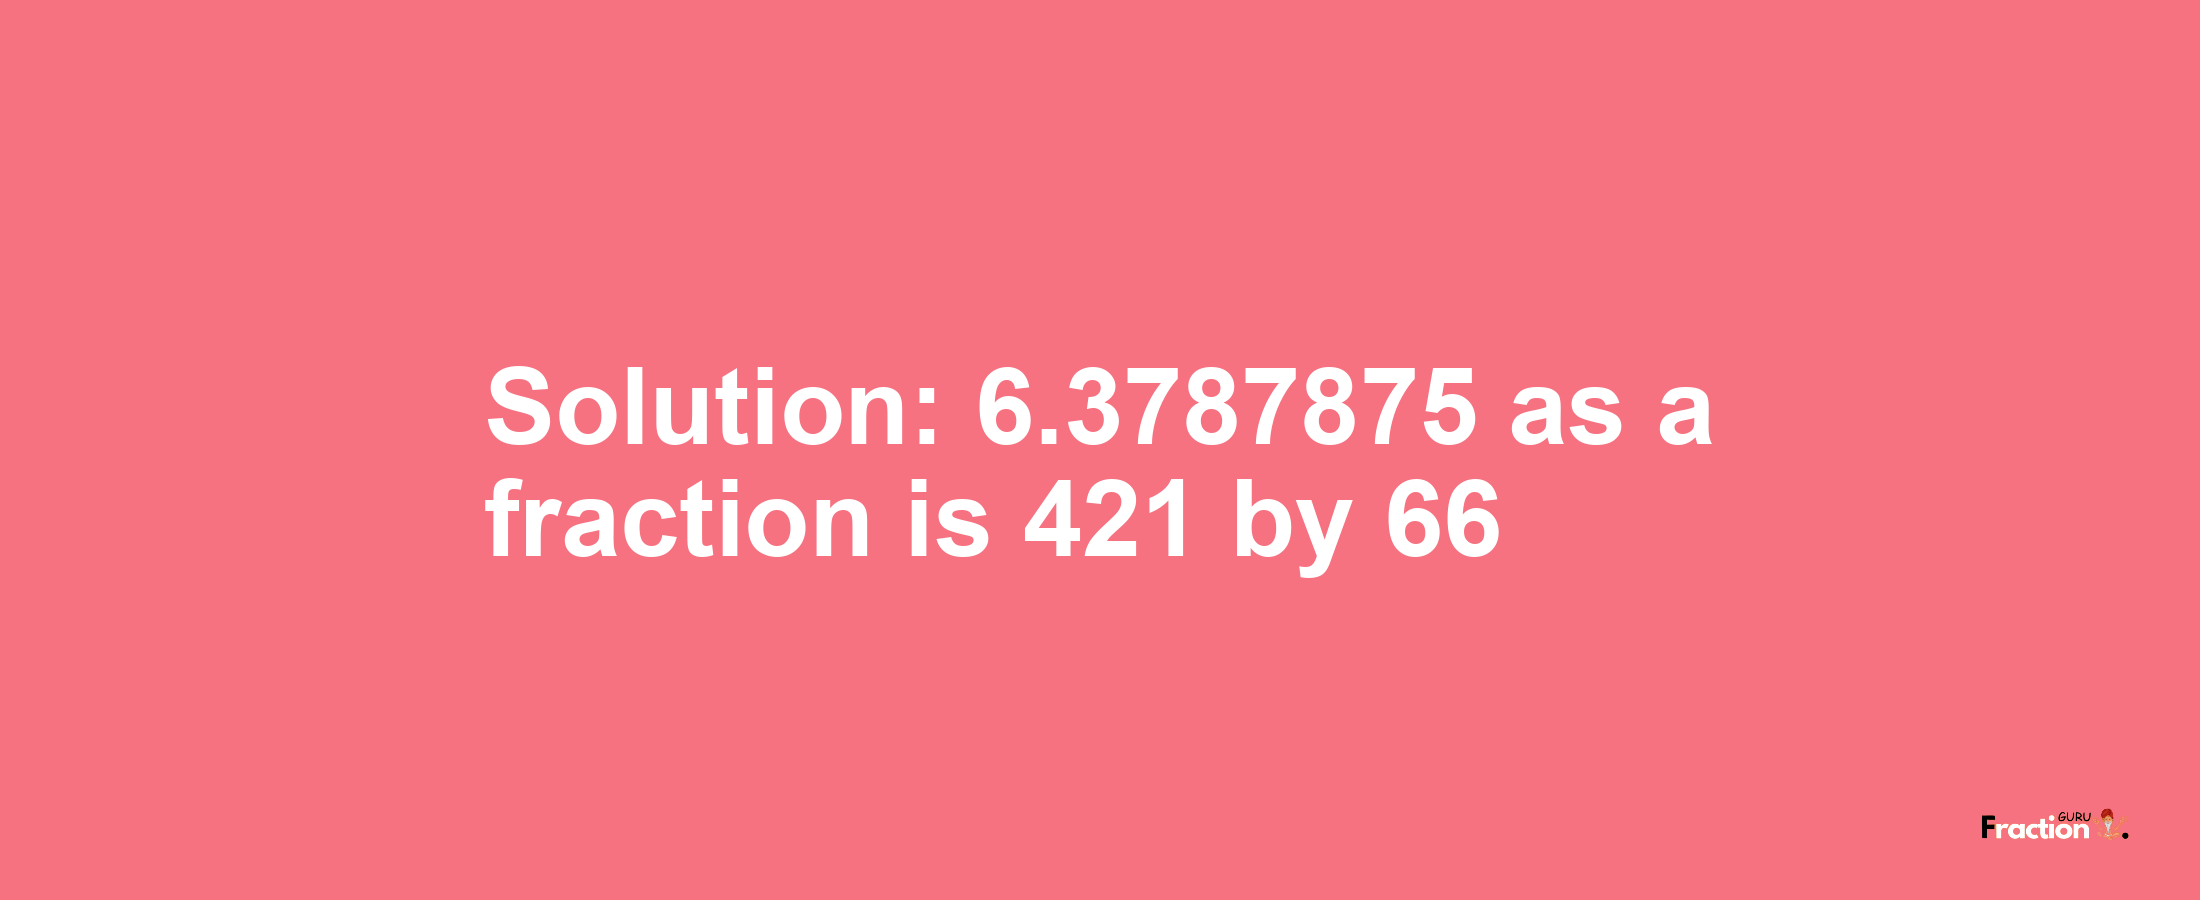 Solution:6.3787875 as a fraction is 421/66